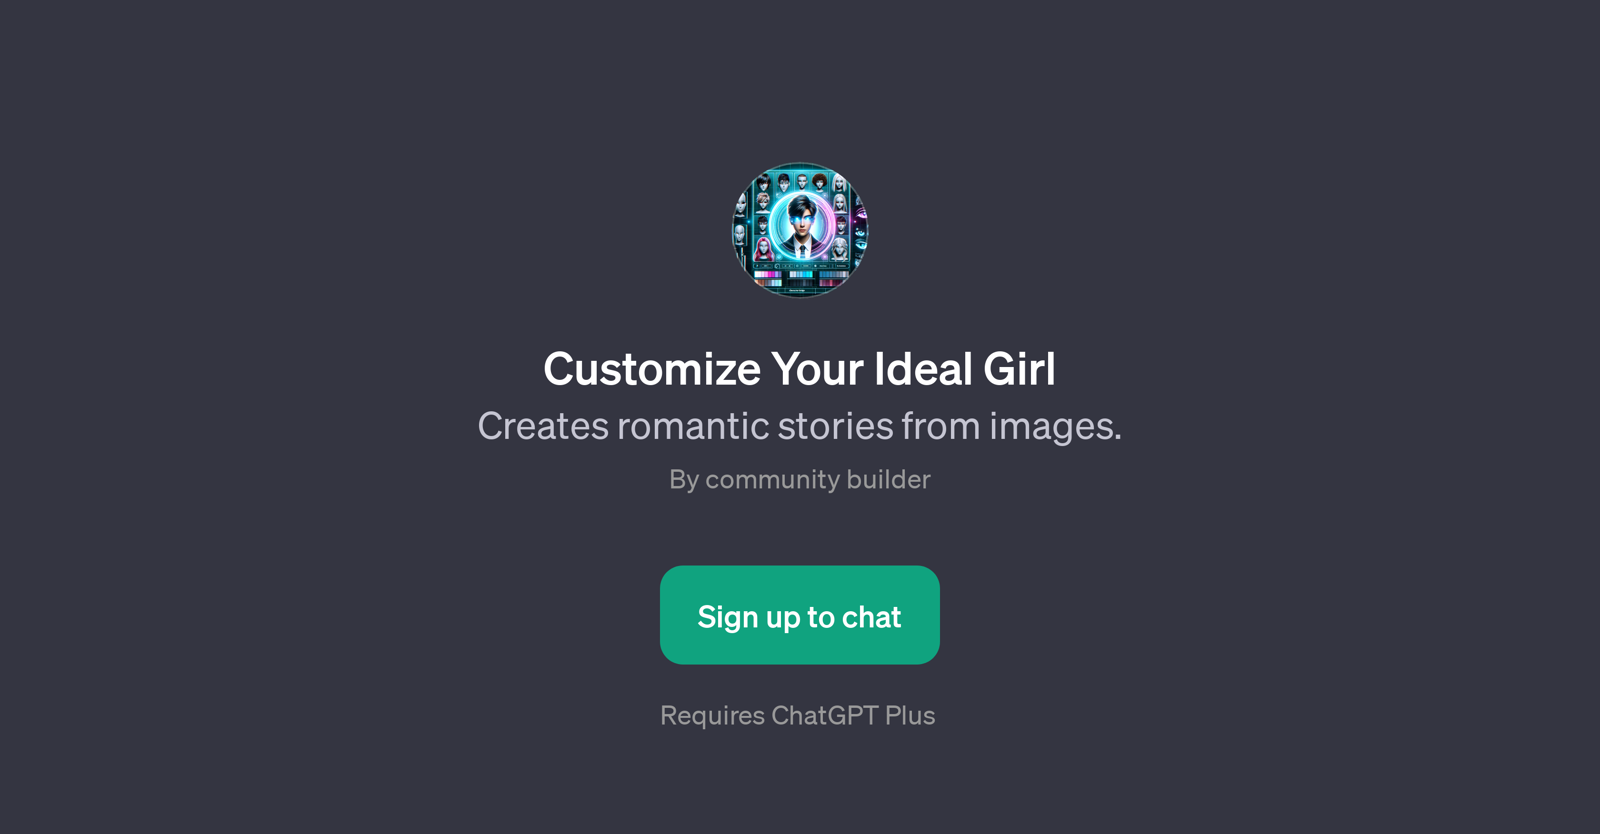 Customize Your Ideal Girl website